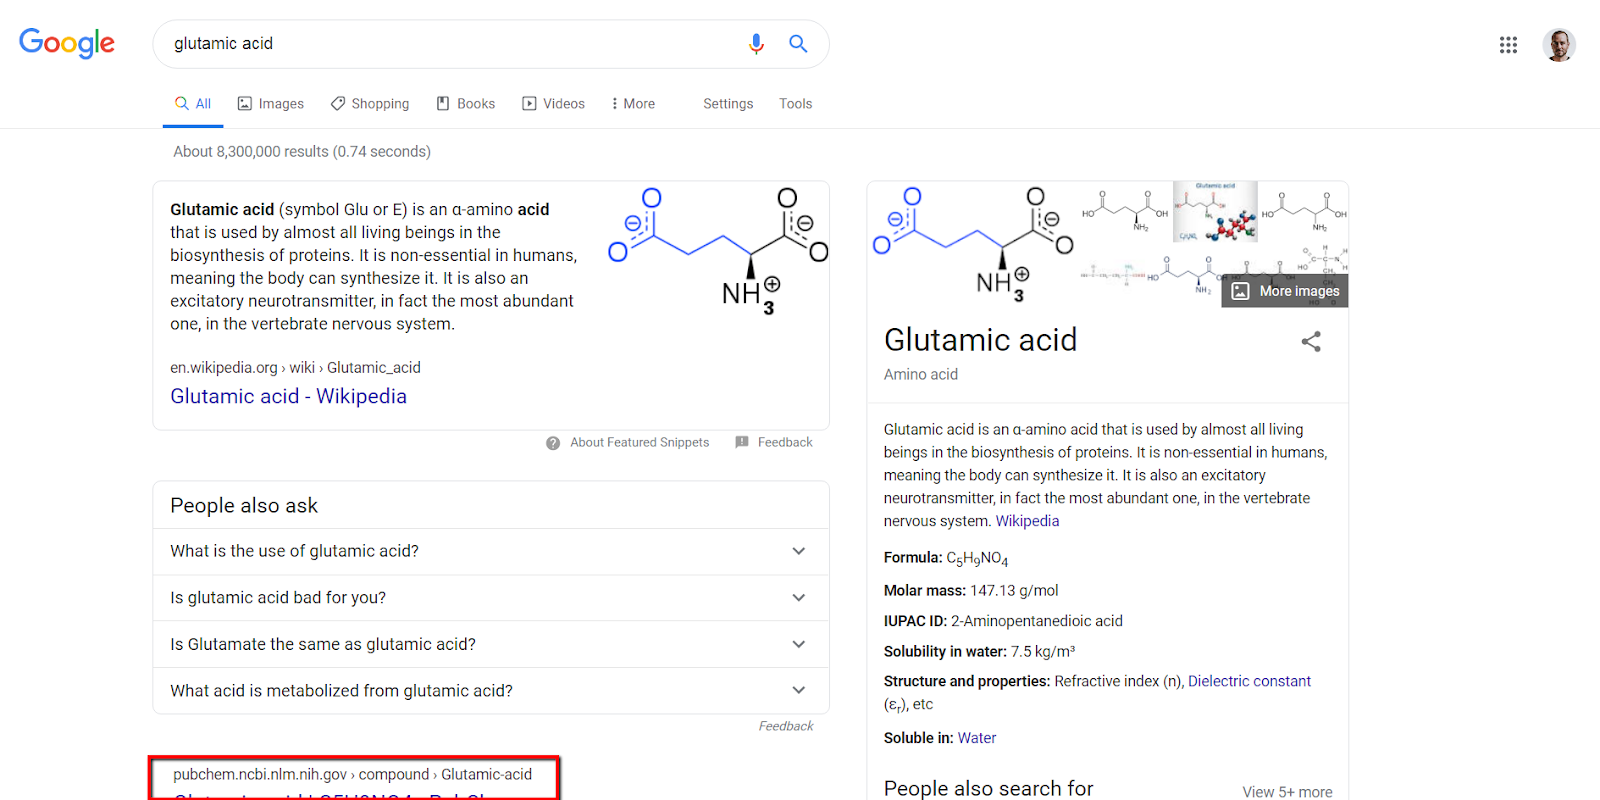 example of second result barely visible below featured snippet on desktop.